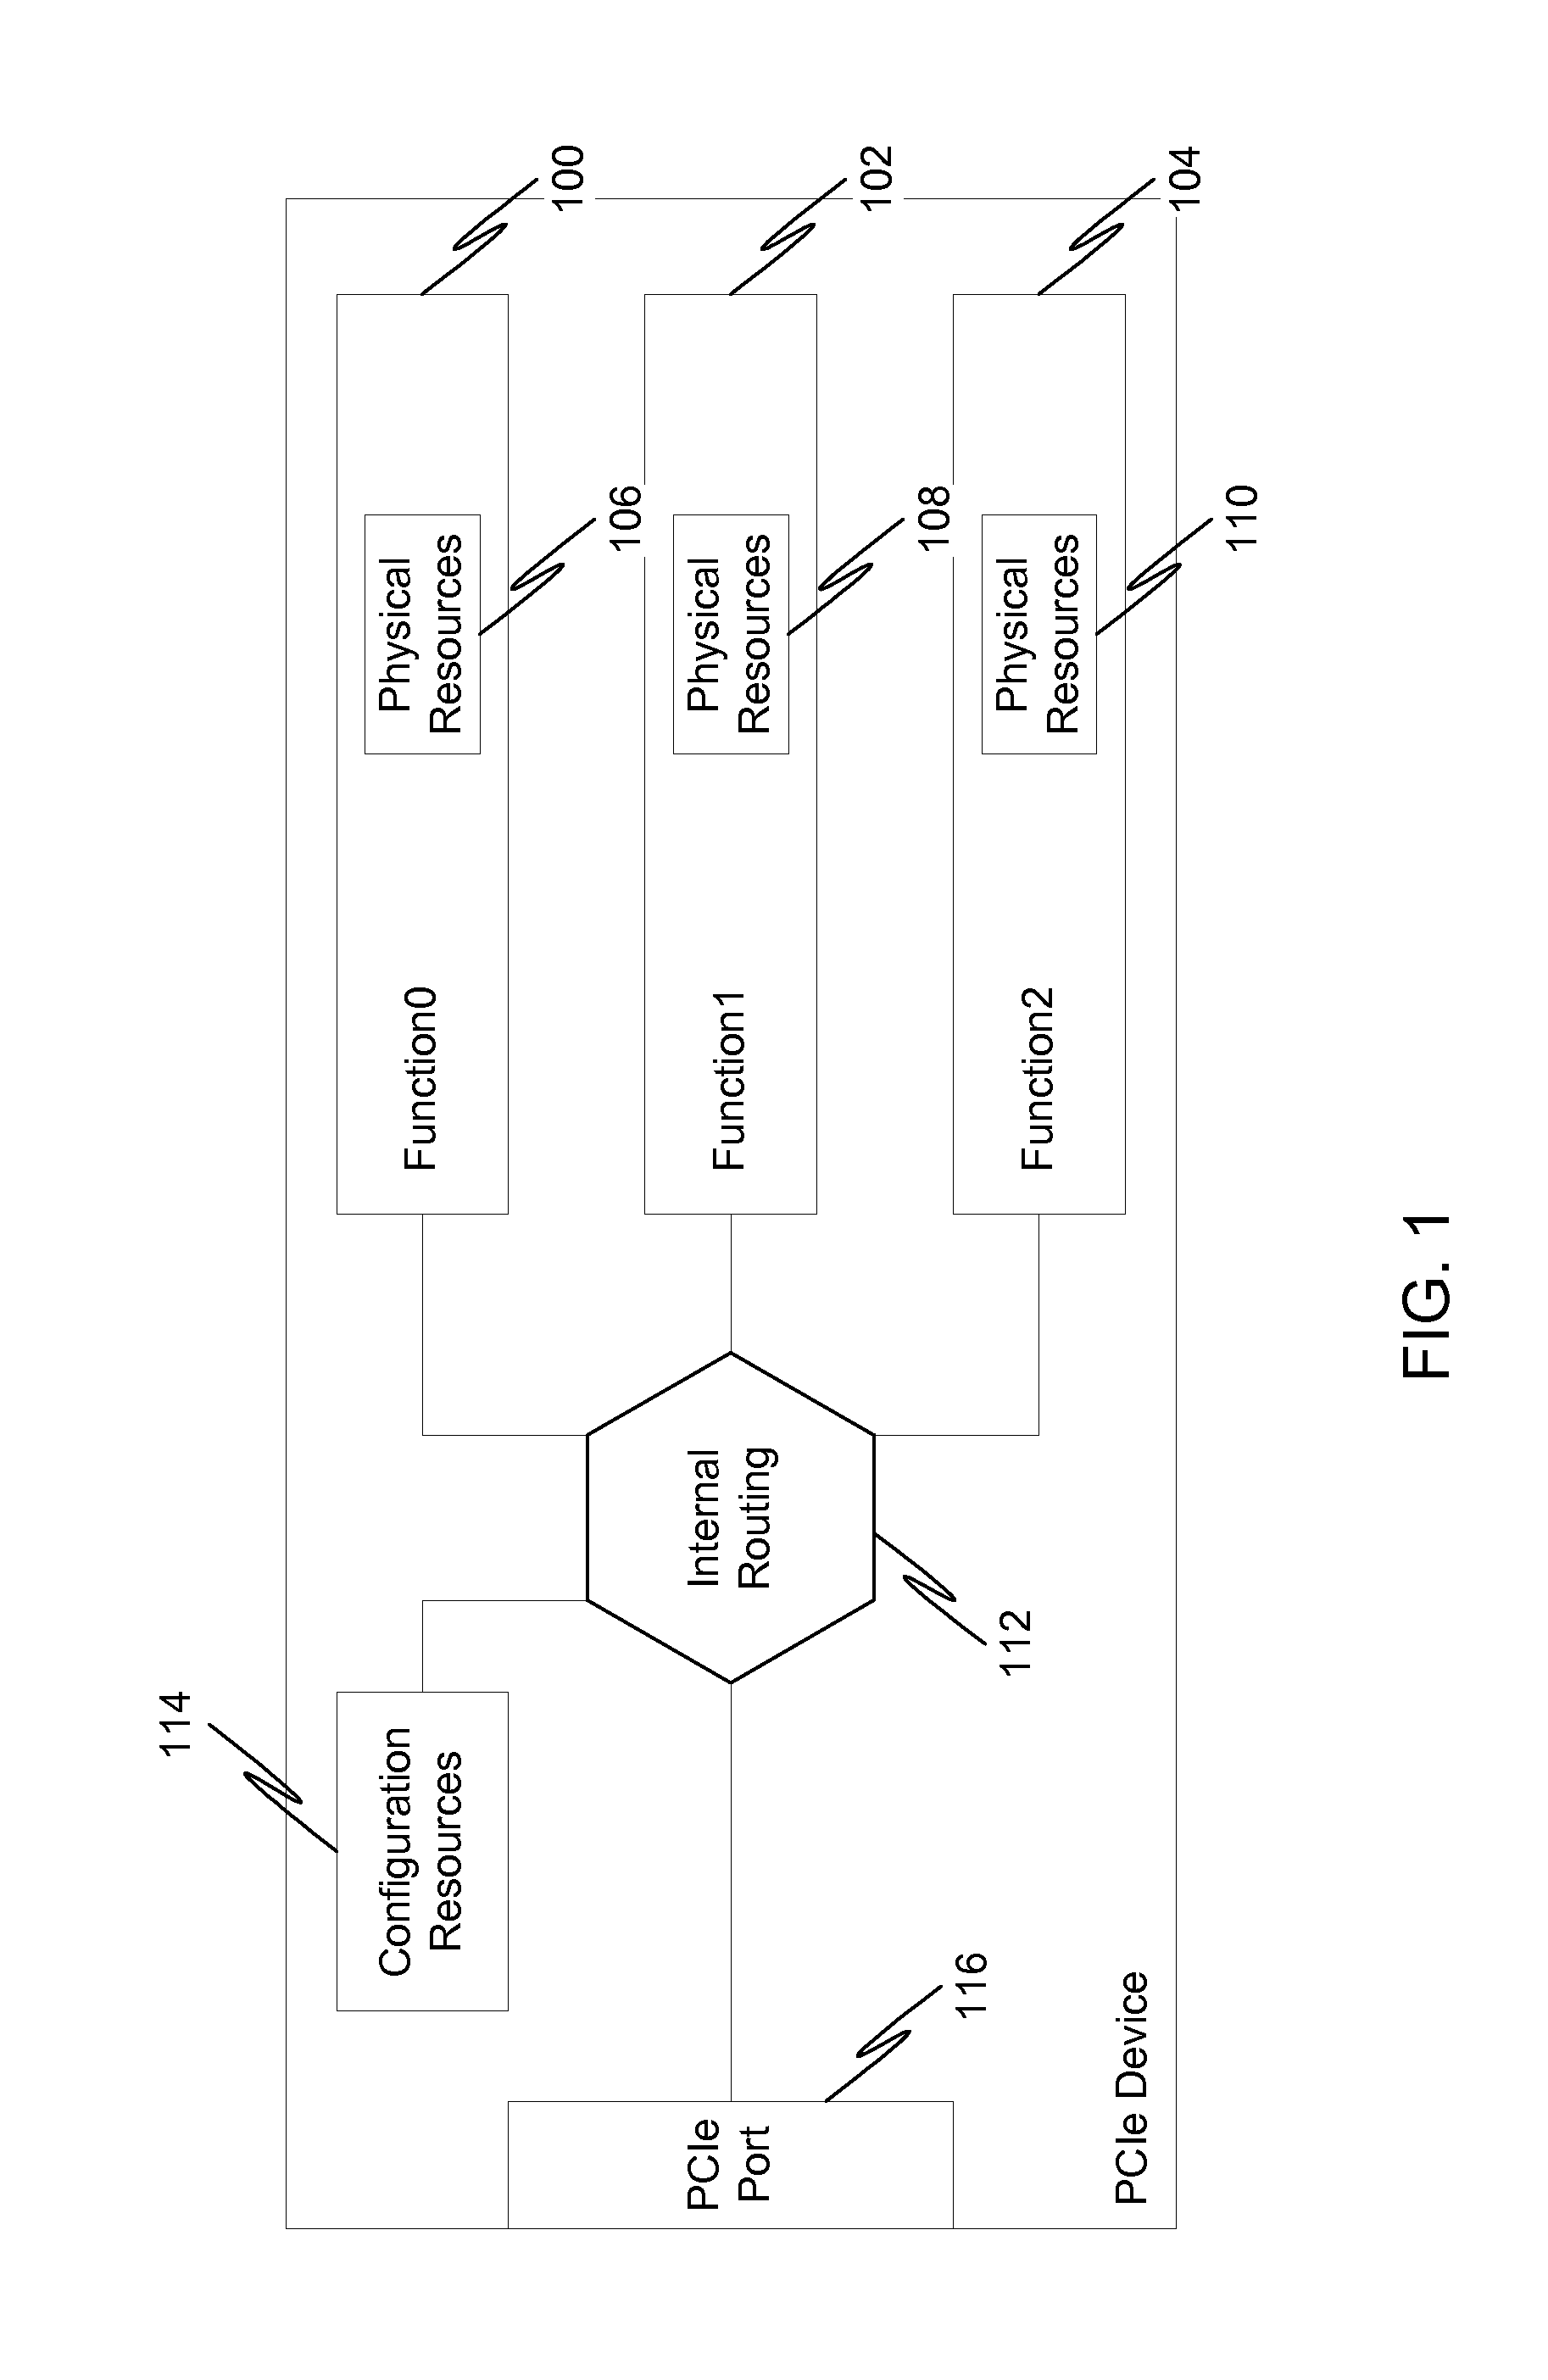 Multi-root sharing of single-root input/output virtualization